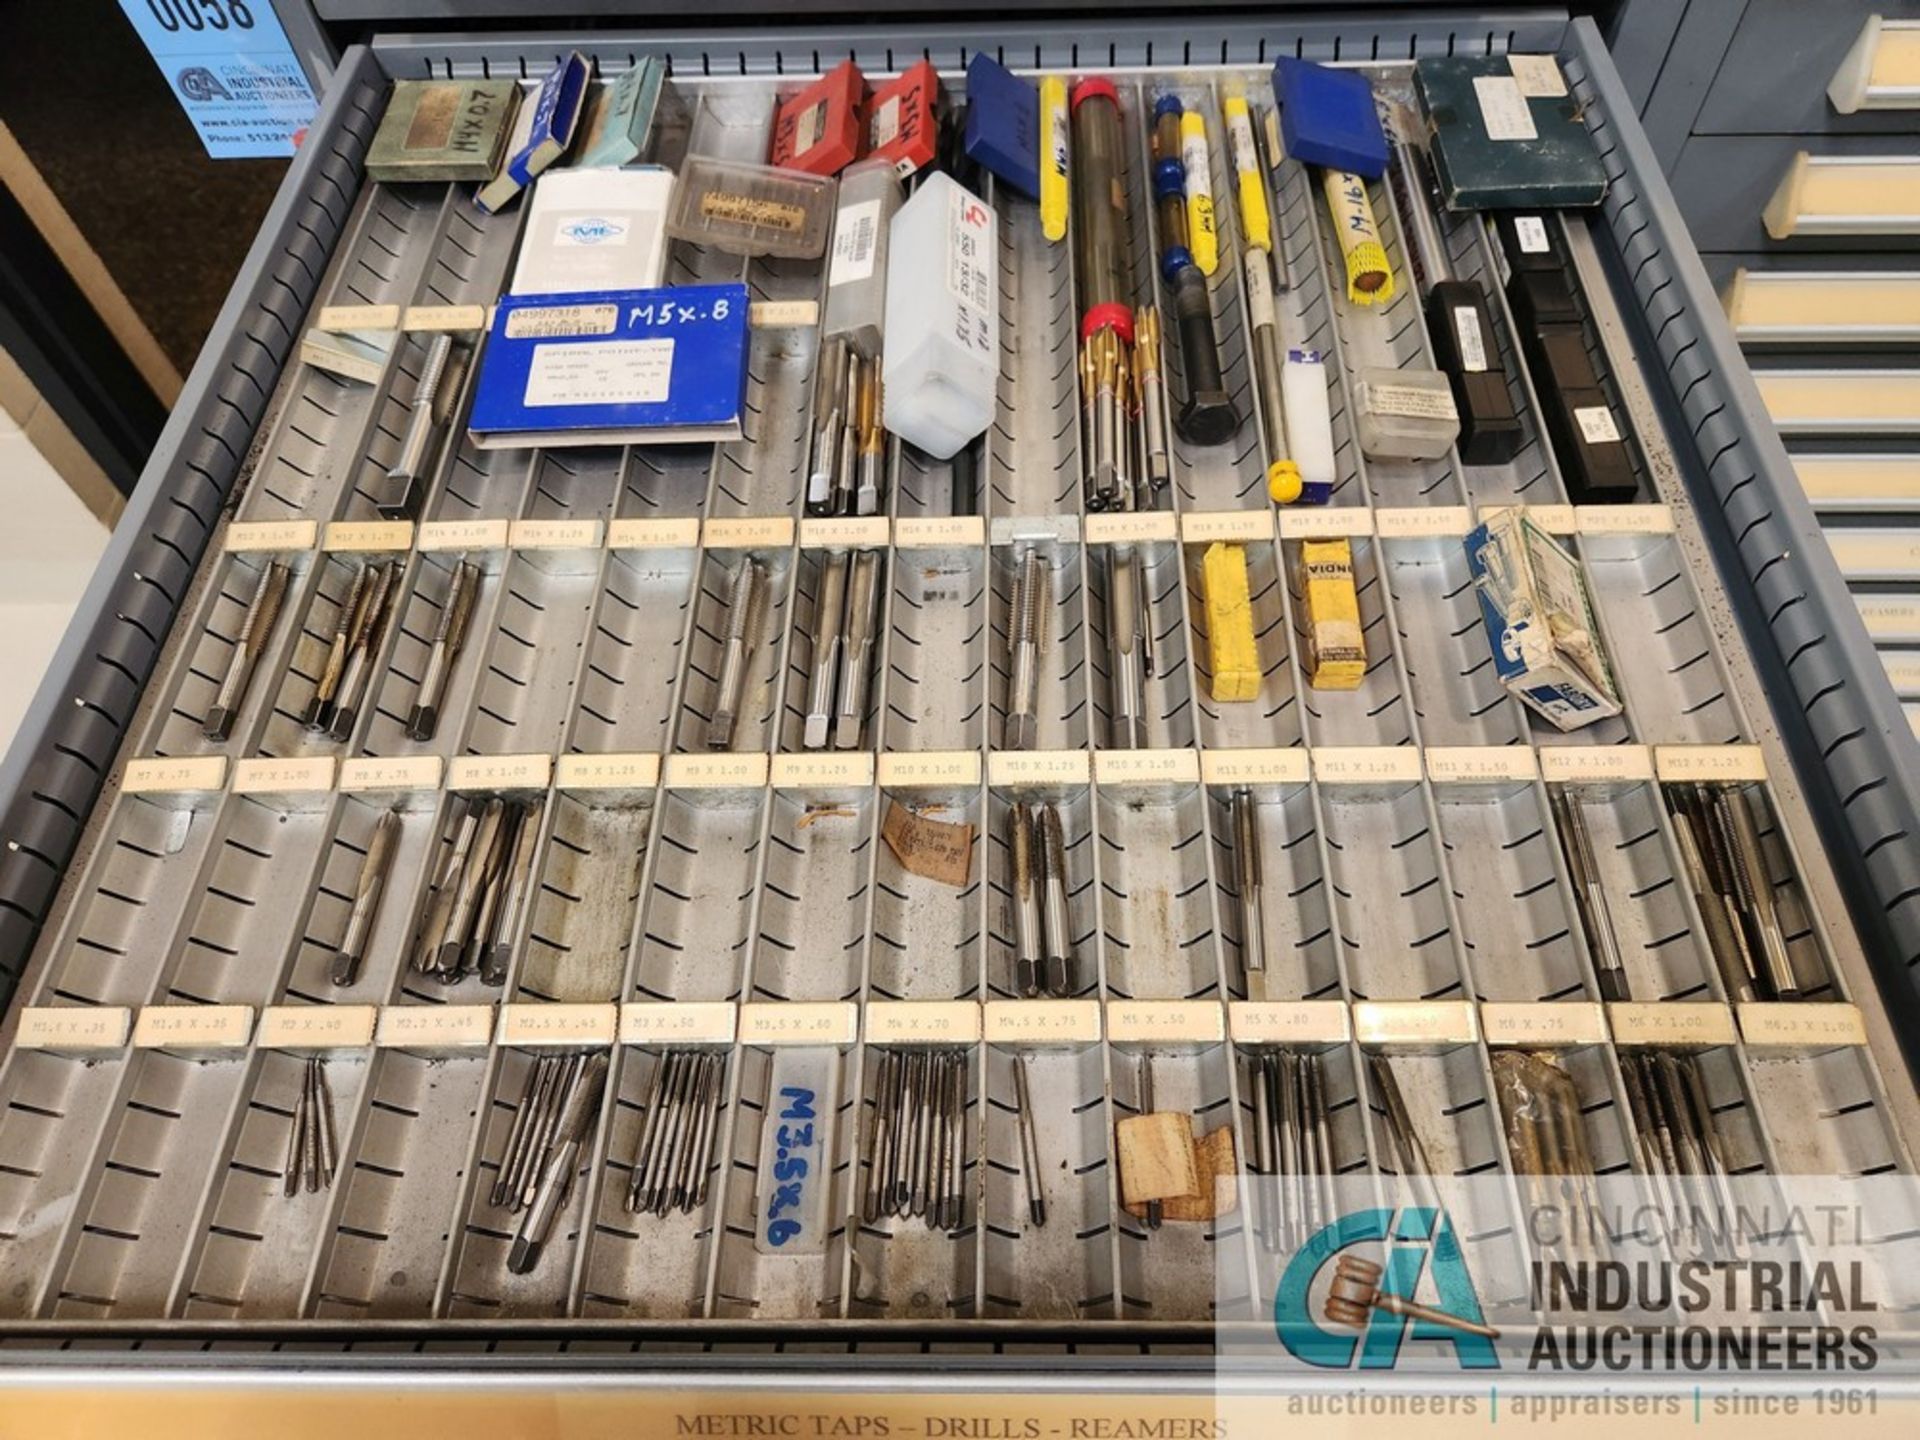 15-DRAWER STANLEY VIDMAR TOOLING CABINET W/ TAPS, DRILLS REAMERS, BALL MILLS, END MILLS, HOG - Image 3 of 16